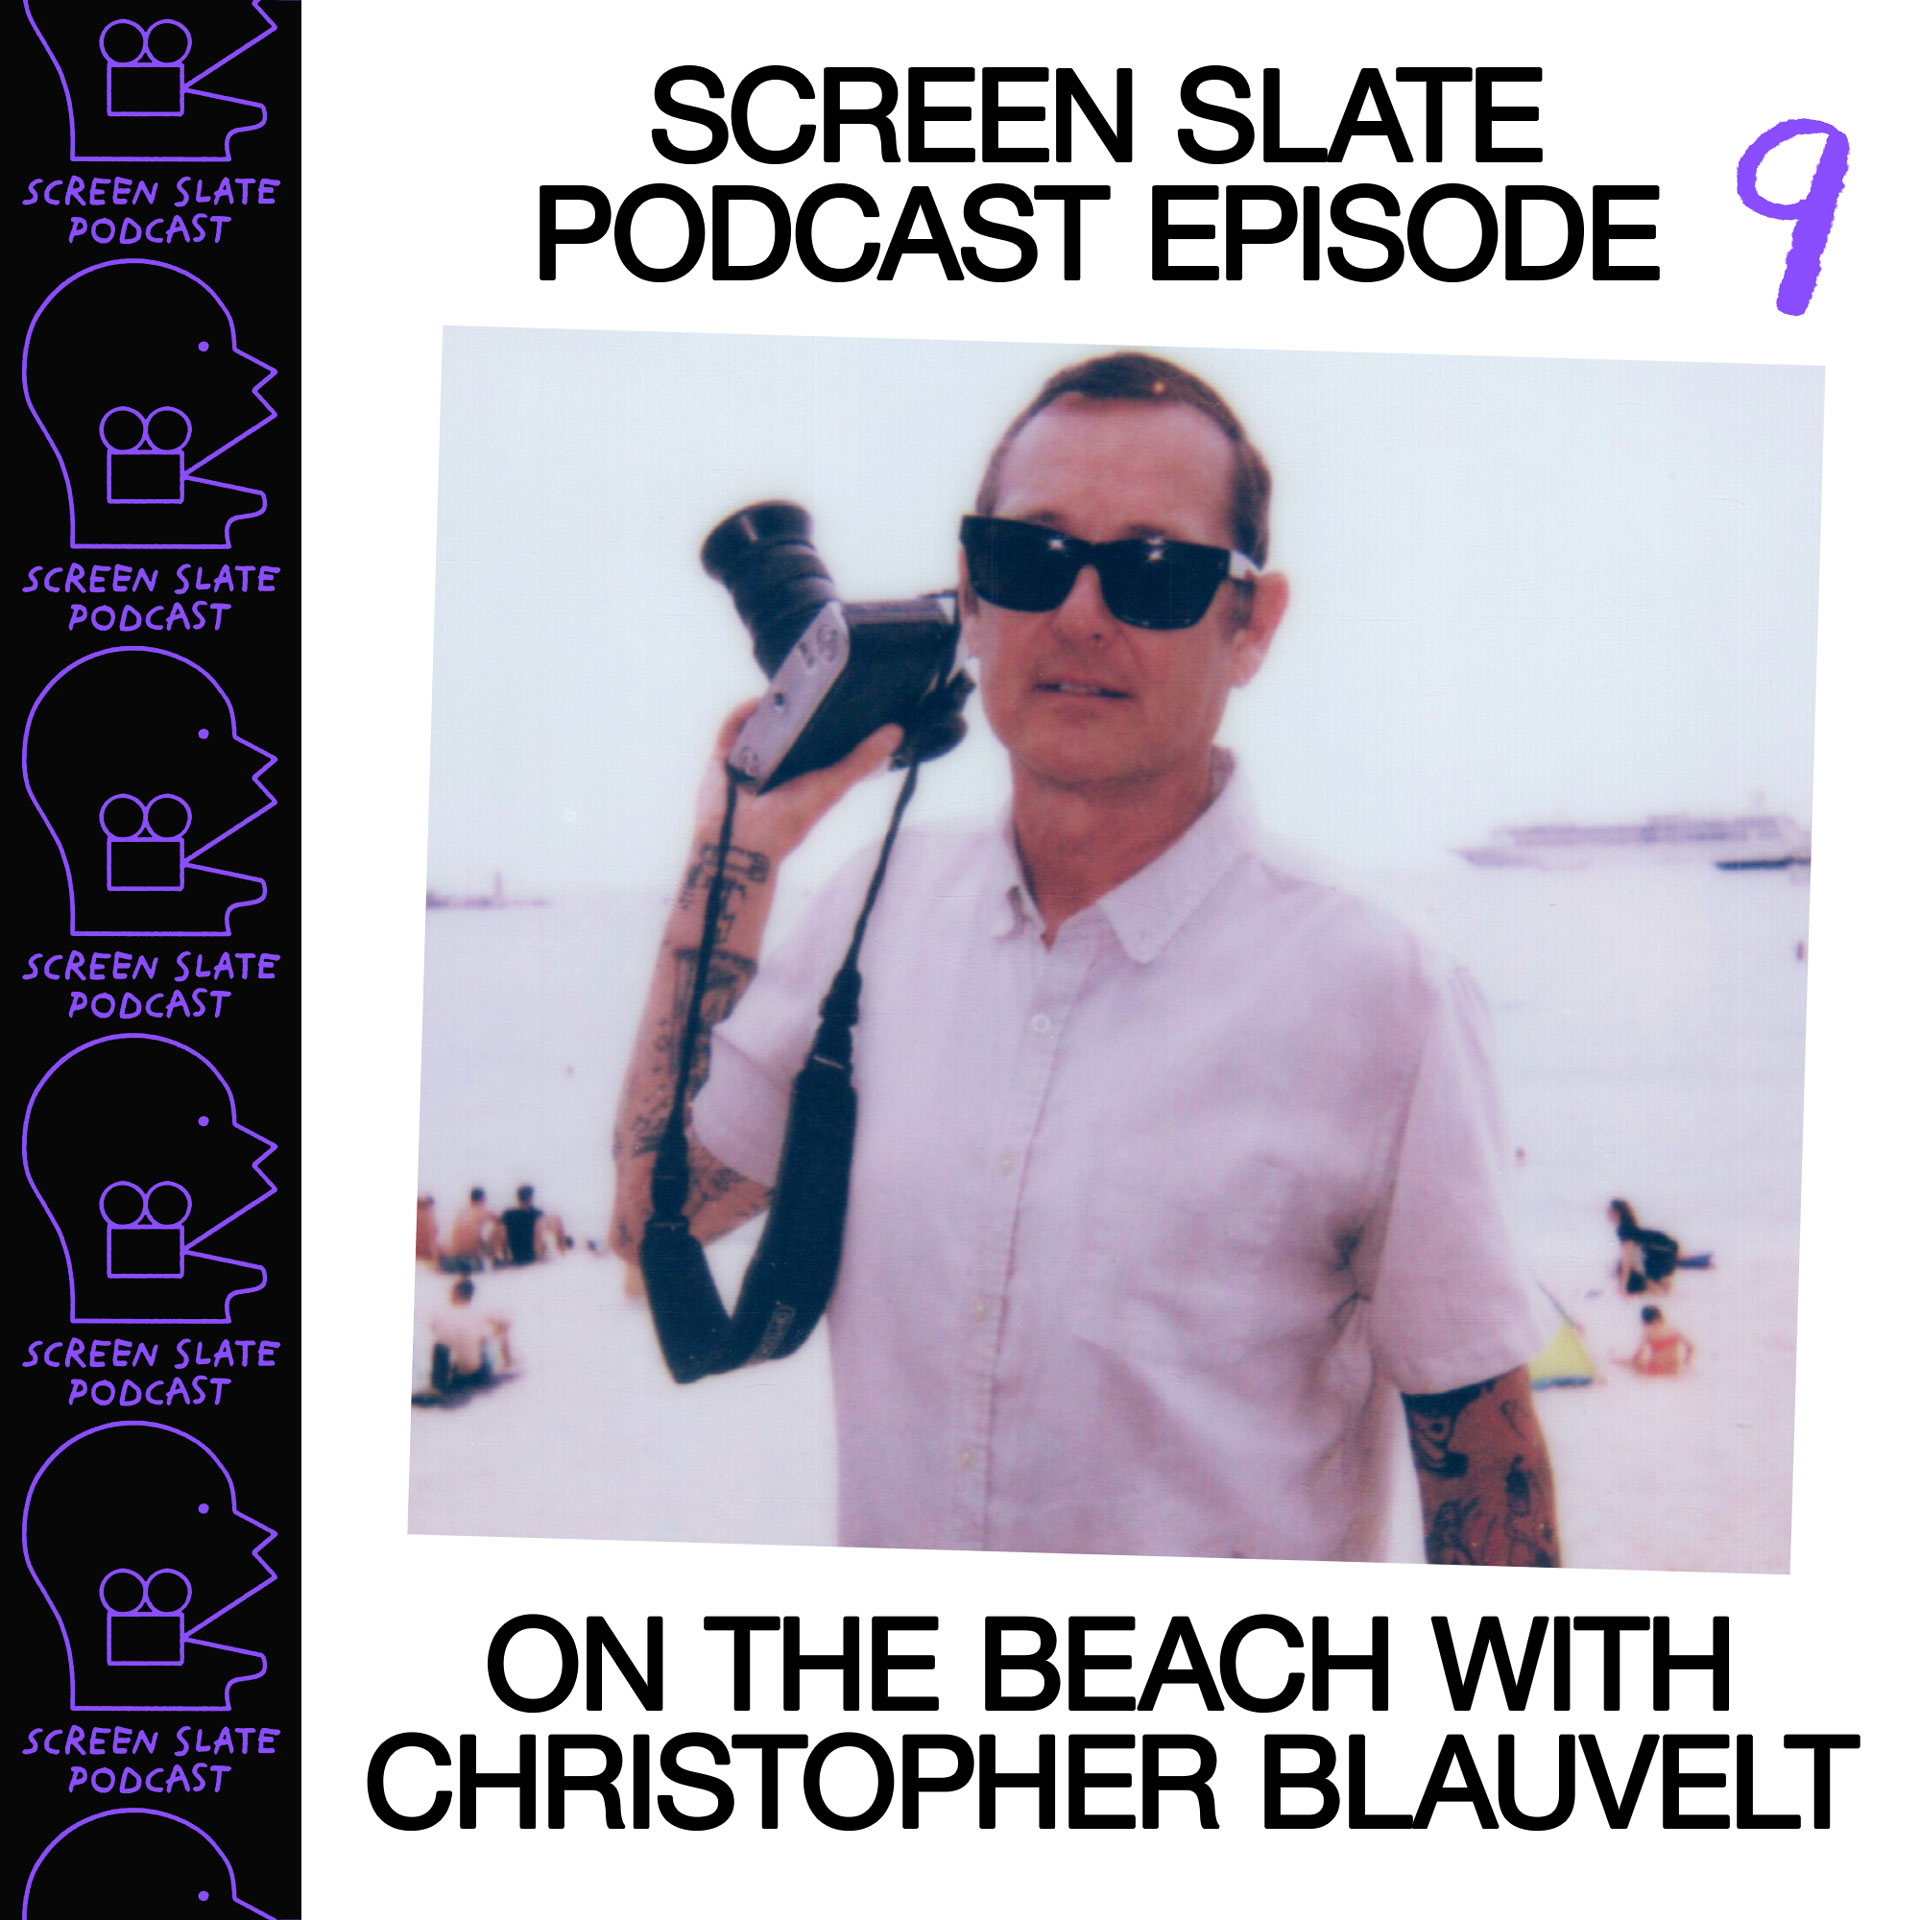 Episode 9 - On the Beach with Christopher Blauvelt